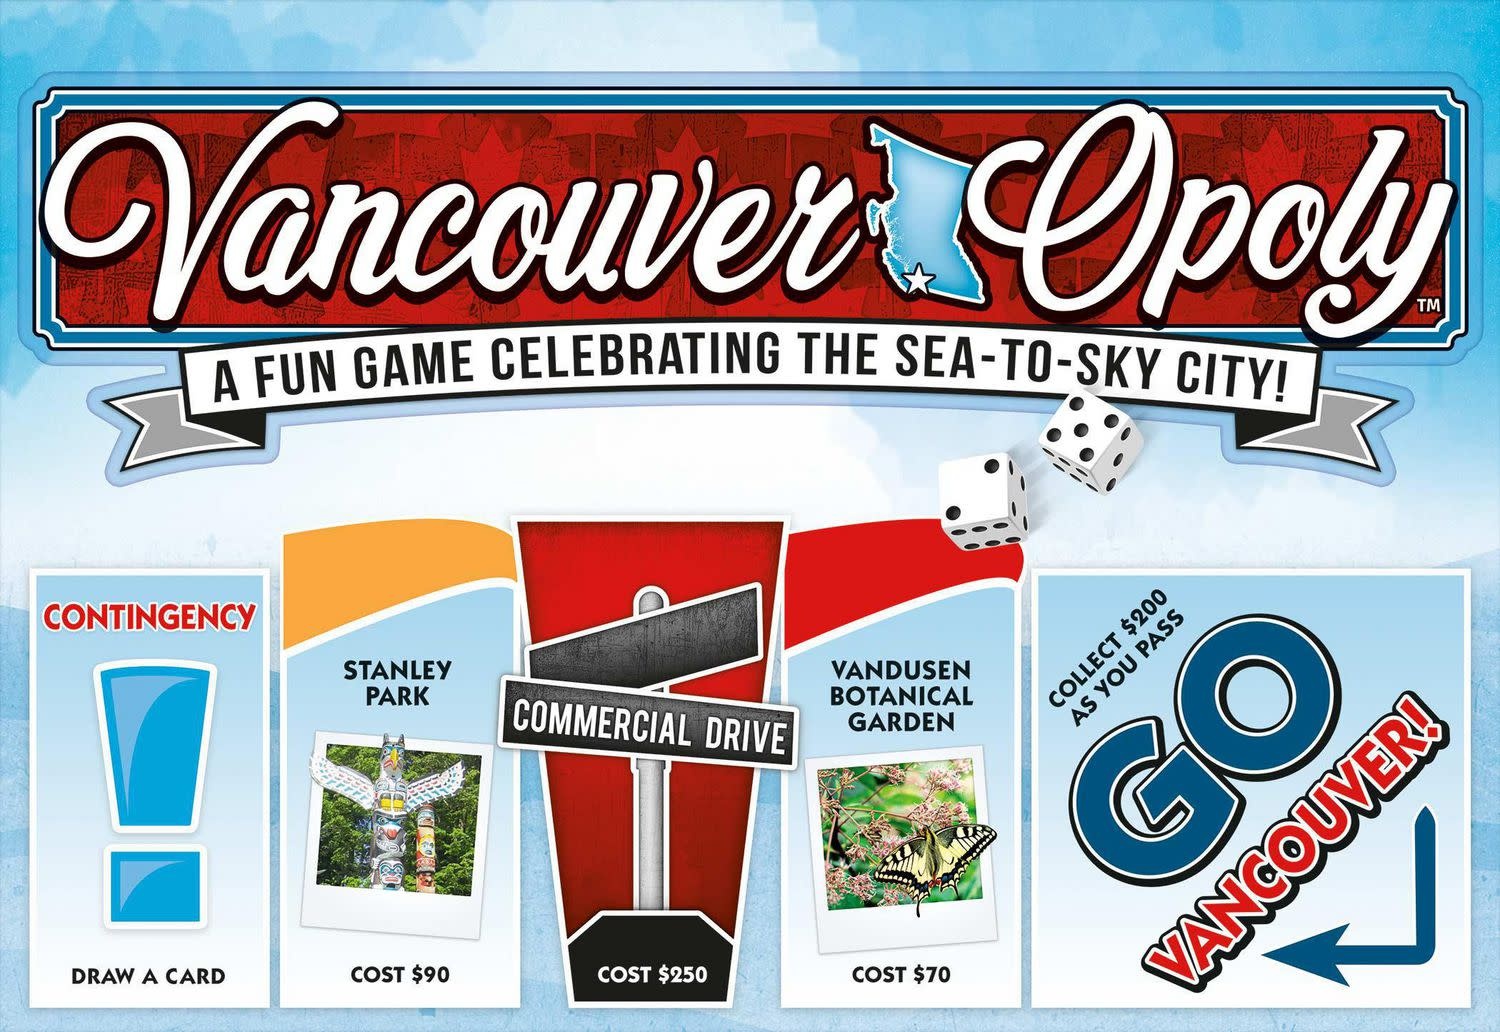 Monopoly - Vancouver-Opoly